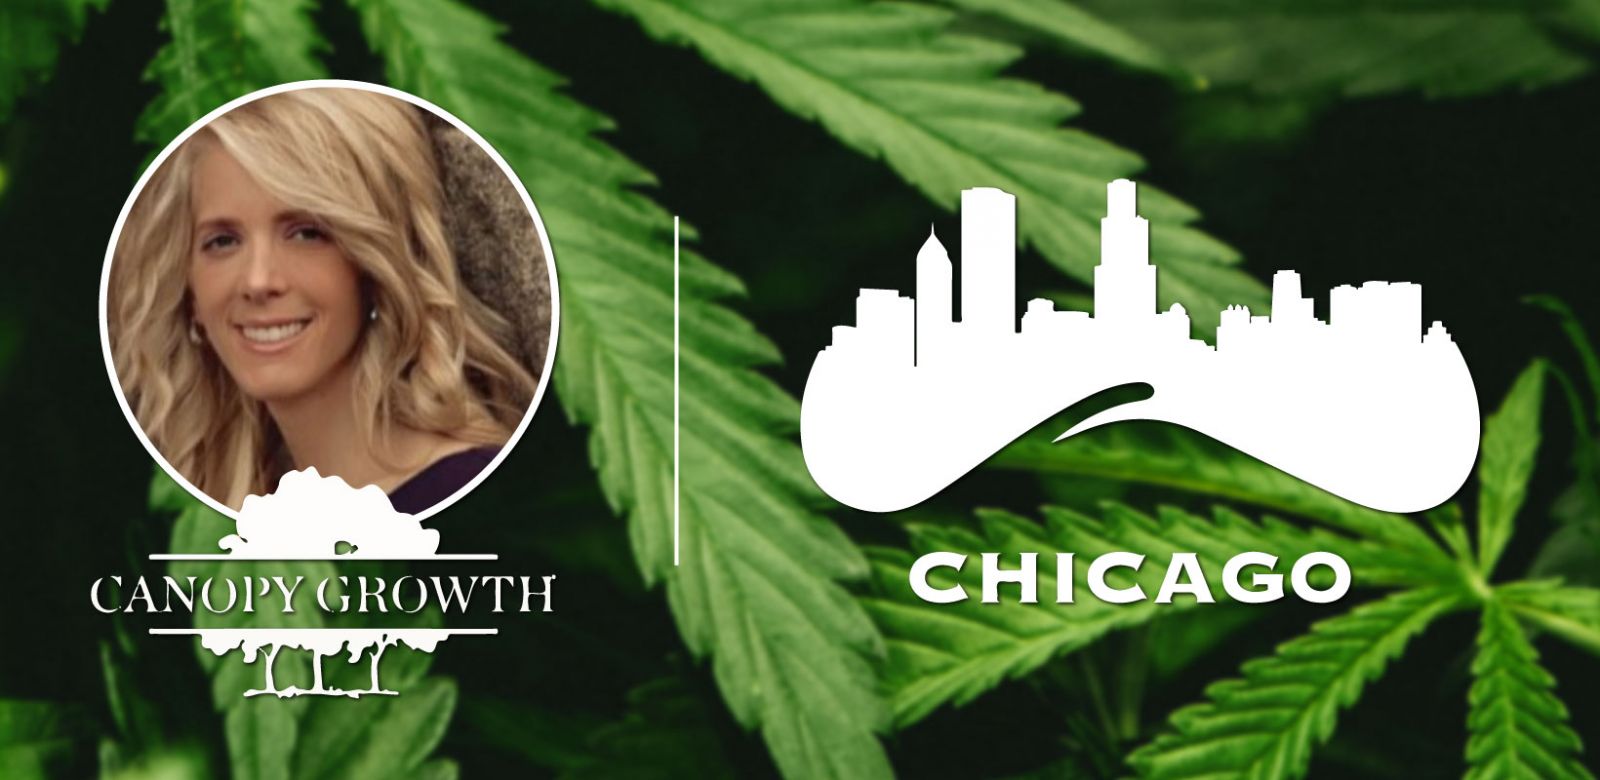 Photo for: Meet Tara Rozalowsky, VP of Beverages & Edibles at Canopy Growth In Chicago On November 15